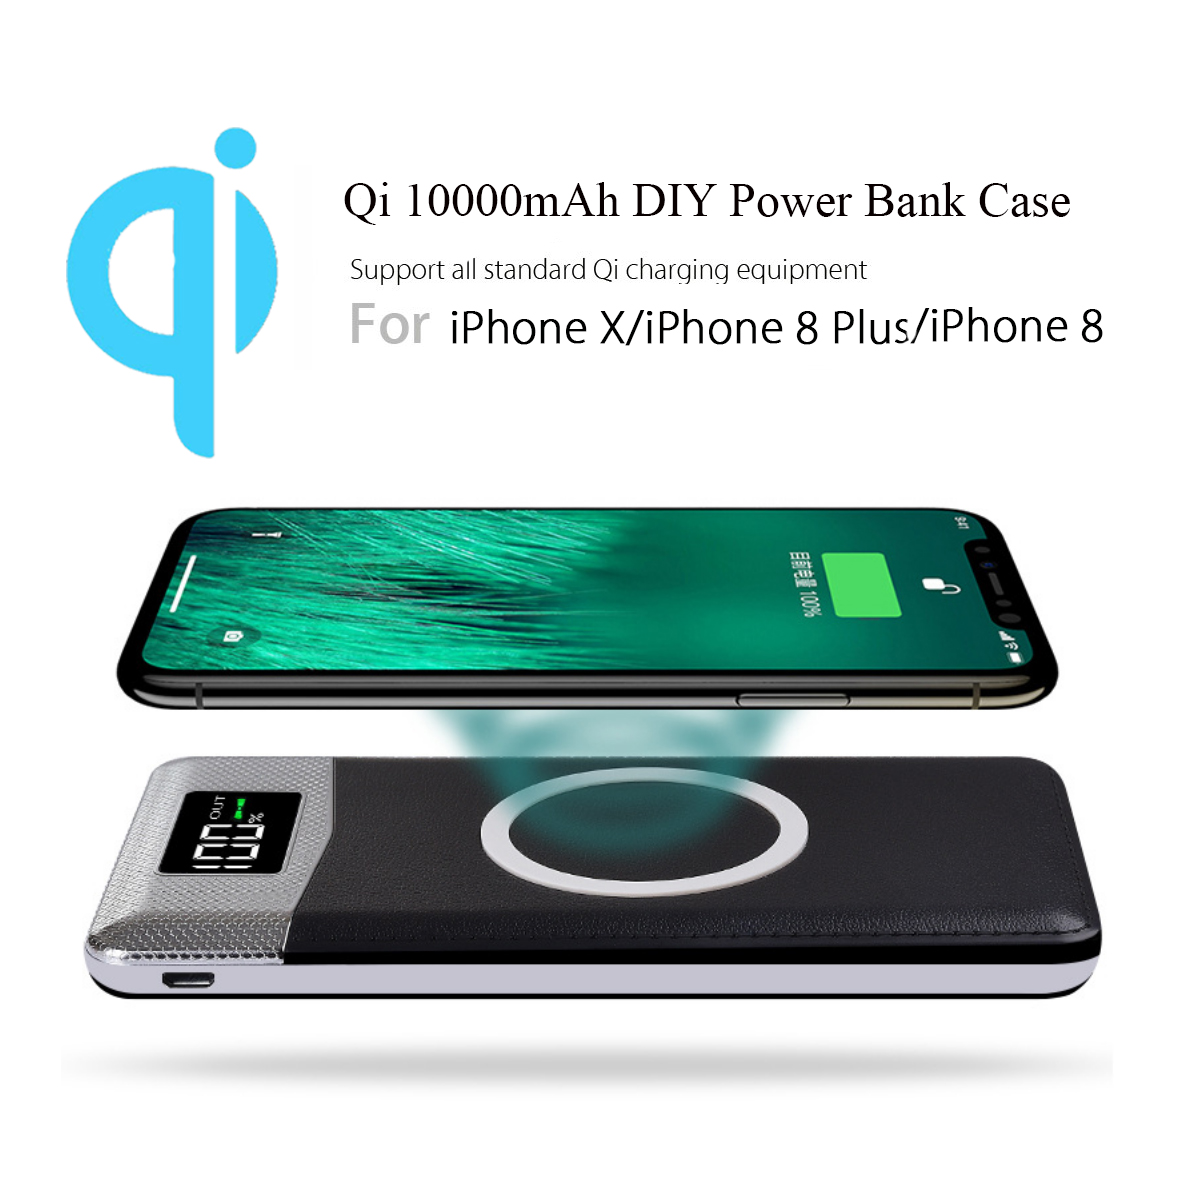 1000mAh-QI-Wireless-Charging-Charger-Power-Bank-DIY-Plastic-Case-Case-With-Flashlight-1277325